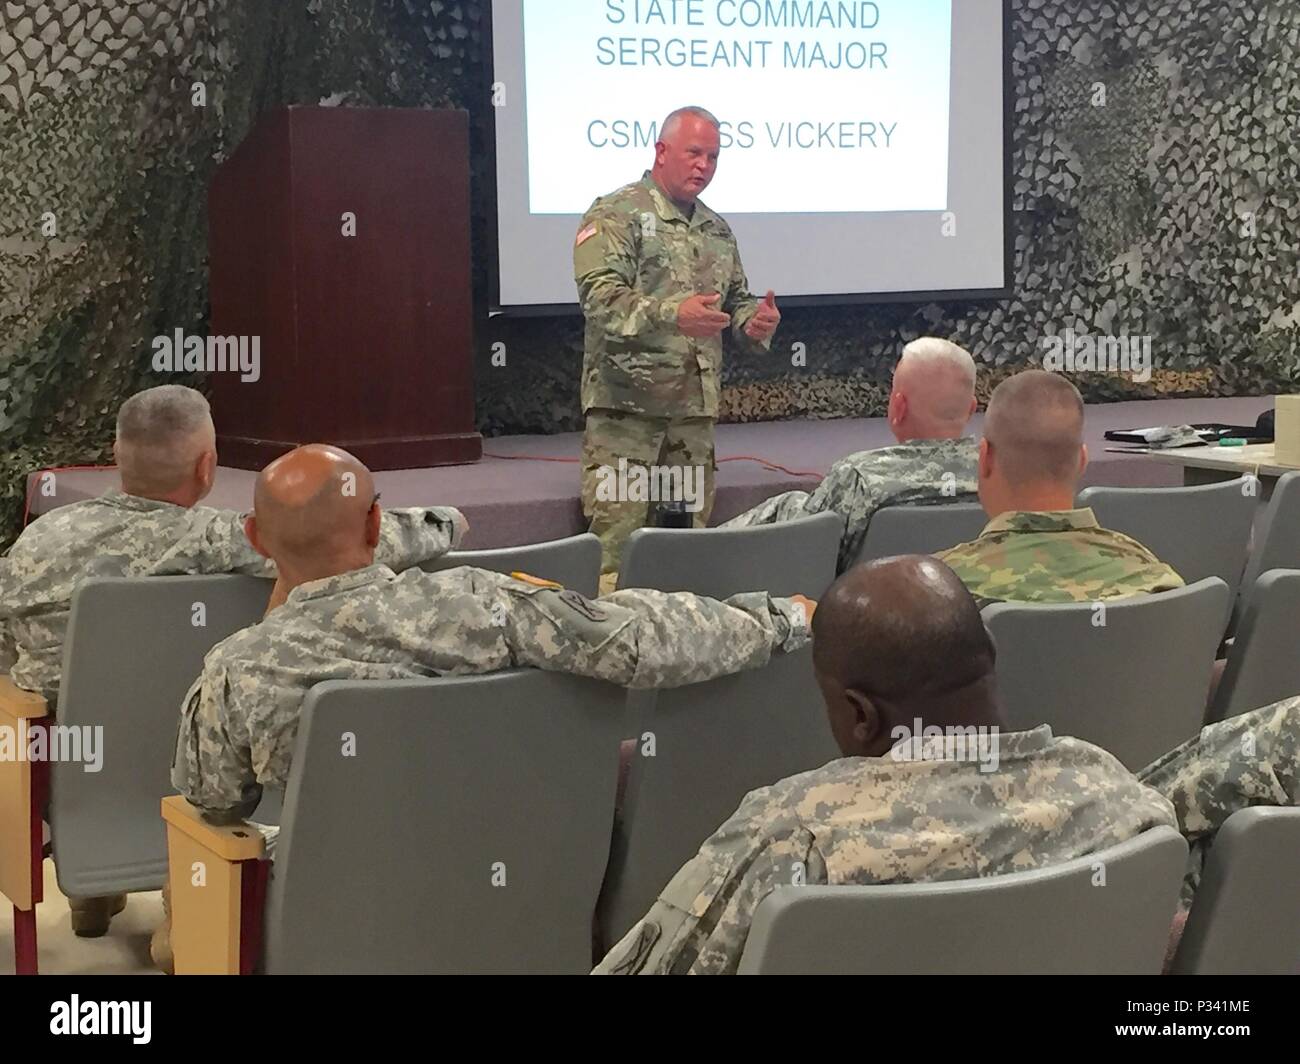 U.S. Army Command Sgt. Maj. Russell A. Vickery speaks to senior ranking noncommissioned officers during the 218th Maneuver Enhancement Brigade’s Command Sergeant Major Call held at McCrady Training Center, Eastover, South Carolina, August 27, 2016. Vickery discussed the need for senior leaders to mentor subordinate Soldiers through the Army Career Tracker and answered questions from senior NCOs of the 218th MEB. (U.S. Army National Guard photo by Sgt. 1st Class Kimberly D. Calkins/released) Stock Photo